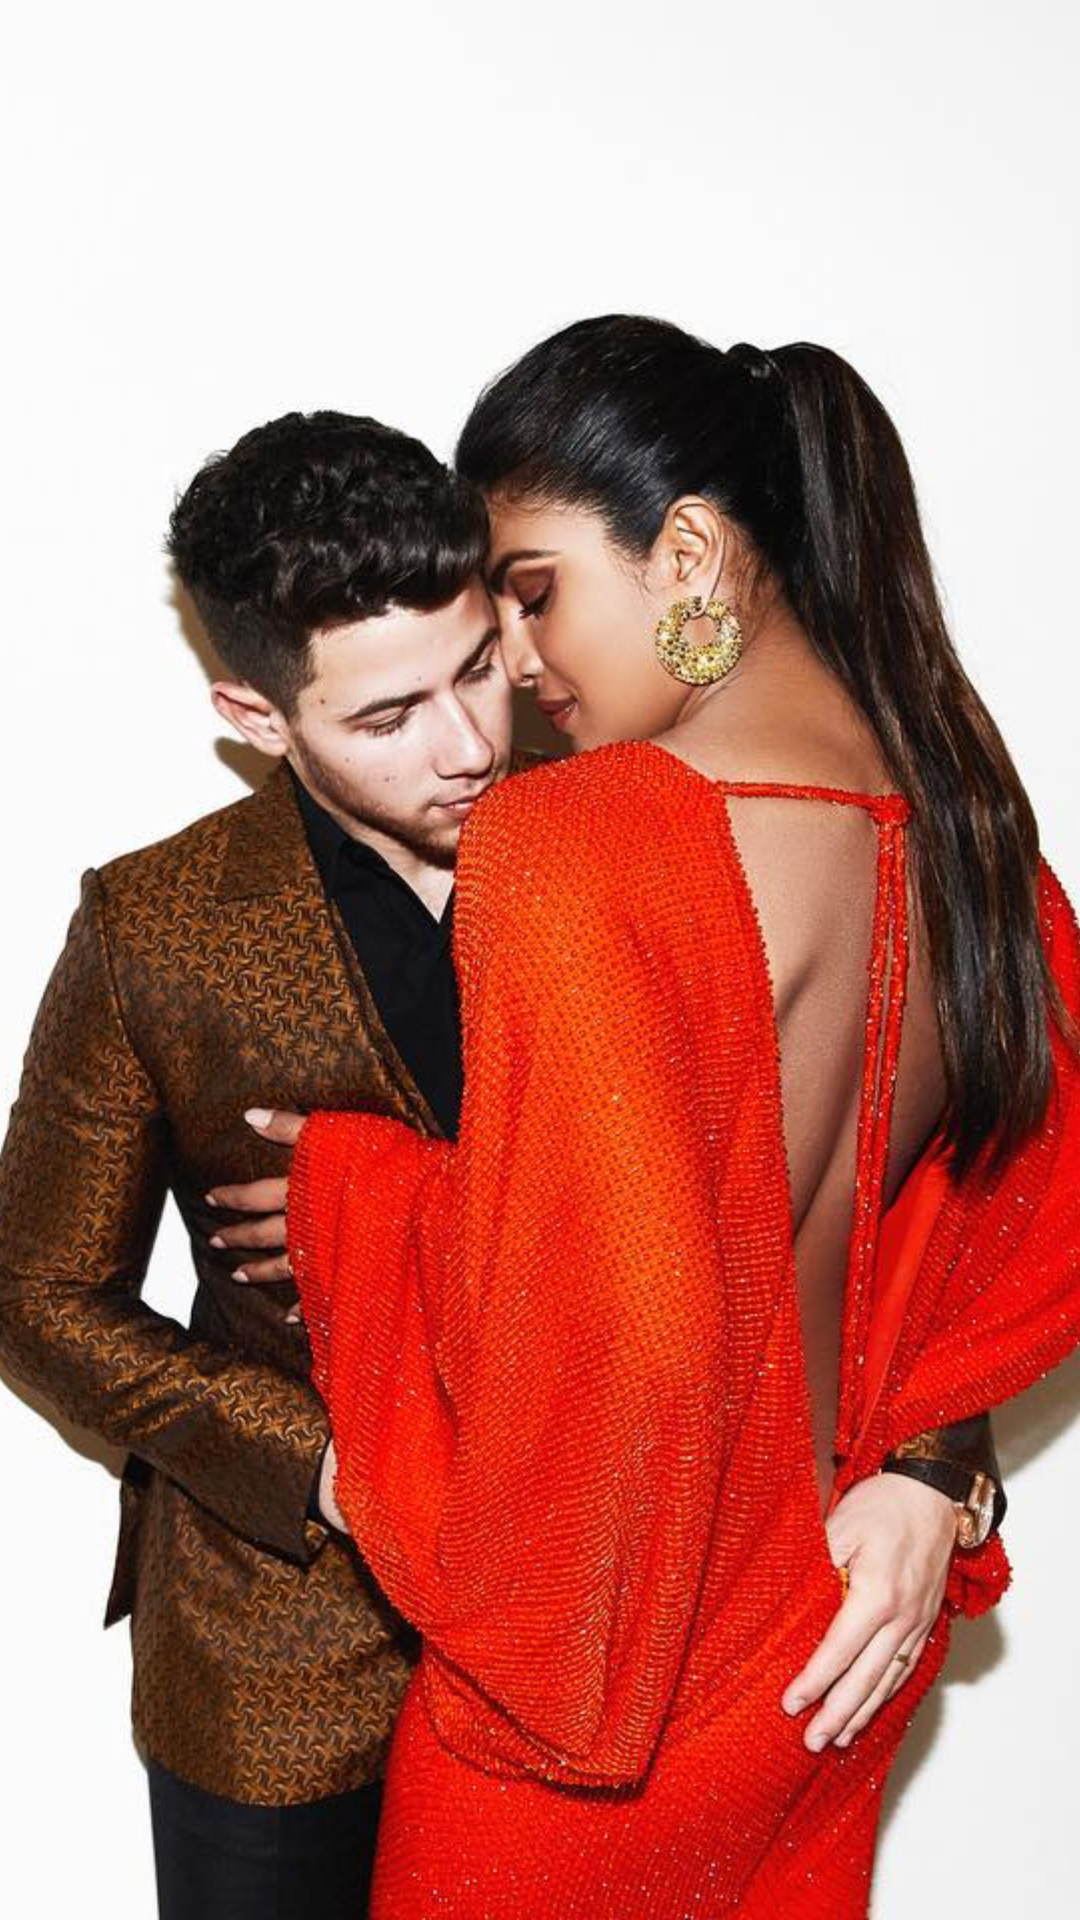 Priyanka Chopra, Nick Jonas are the hottest celebrity couple and these pics are proof